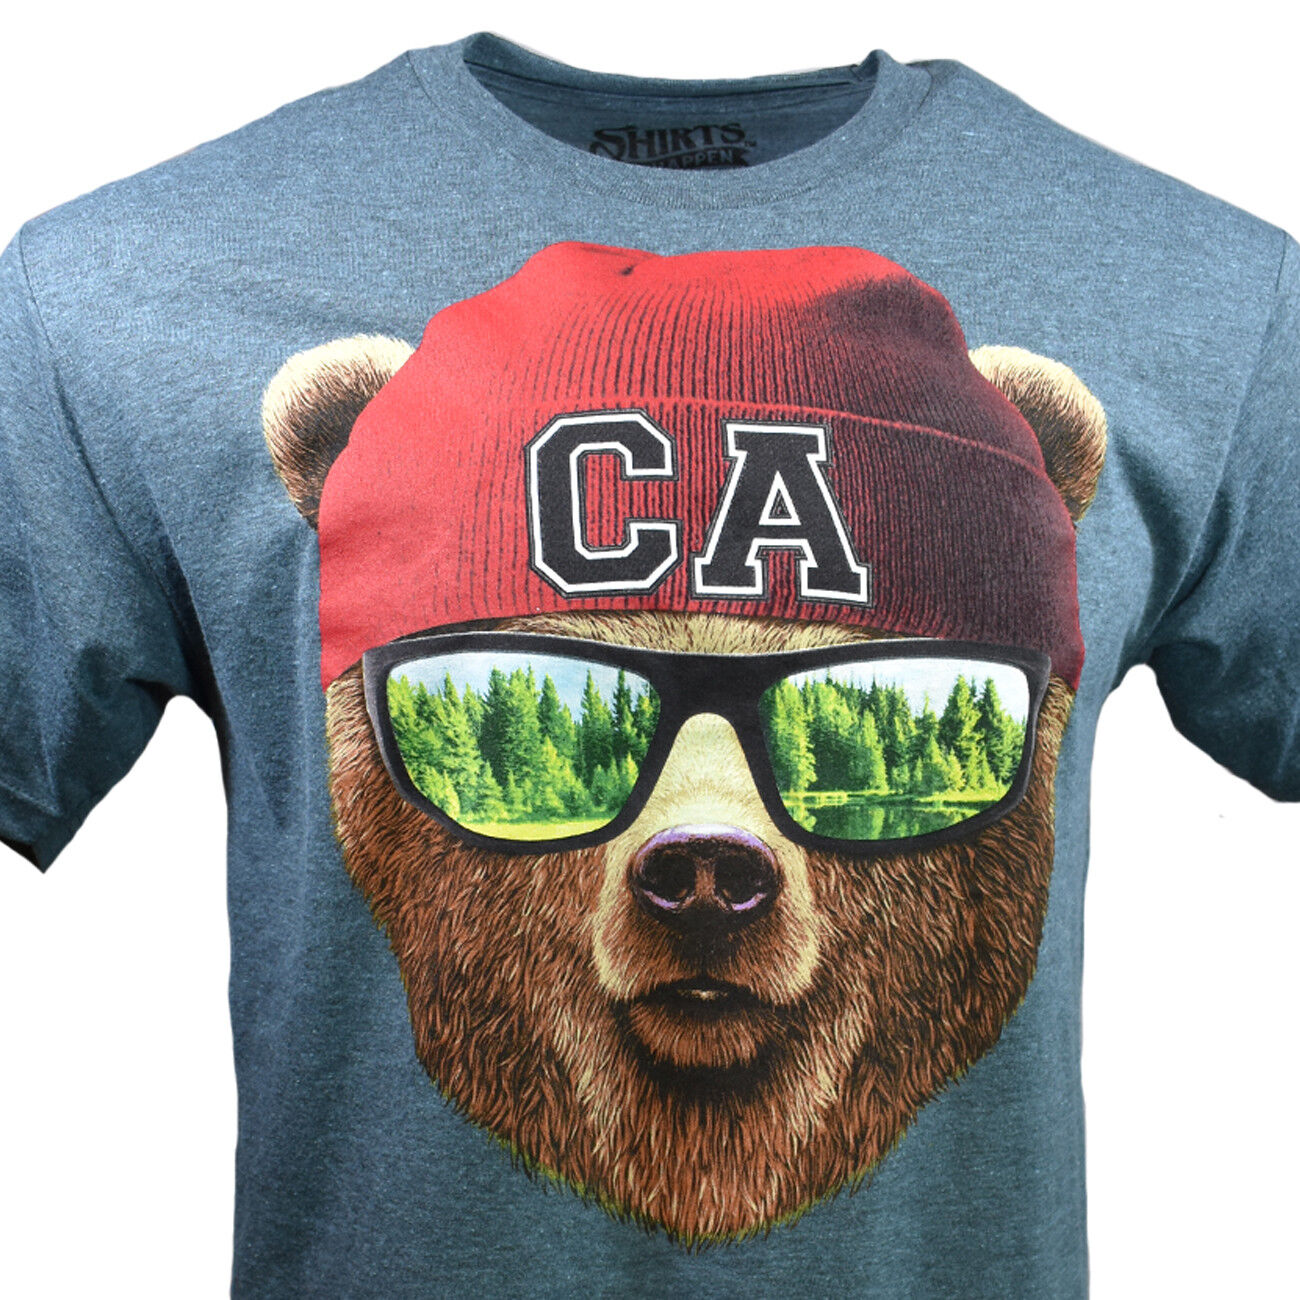 California Bear T-Shirt - CA Bear with Sunglasses and Beanie Graphic Print on Heather Slate Color